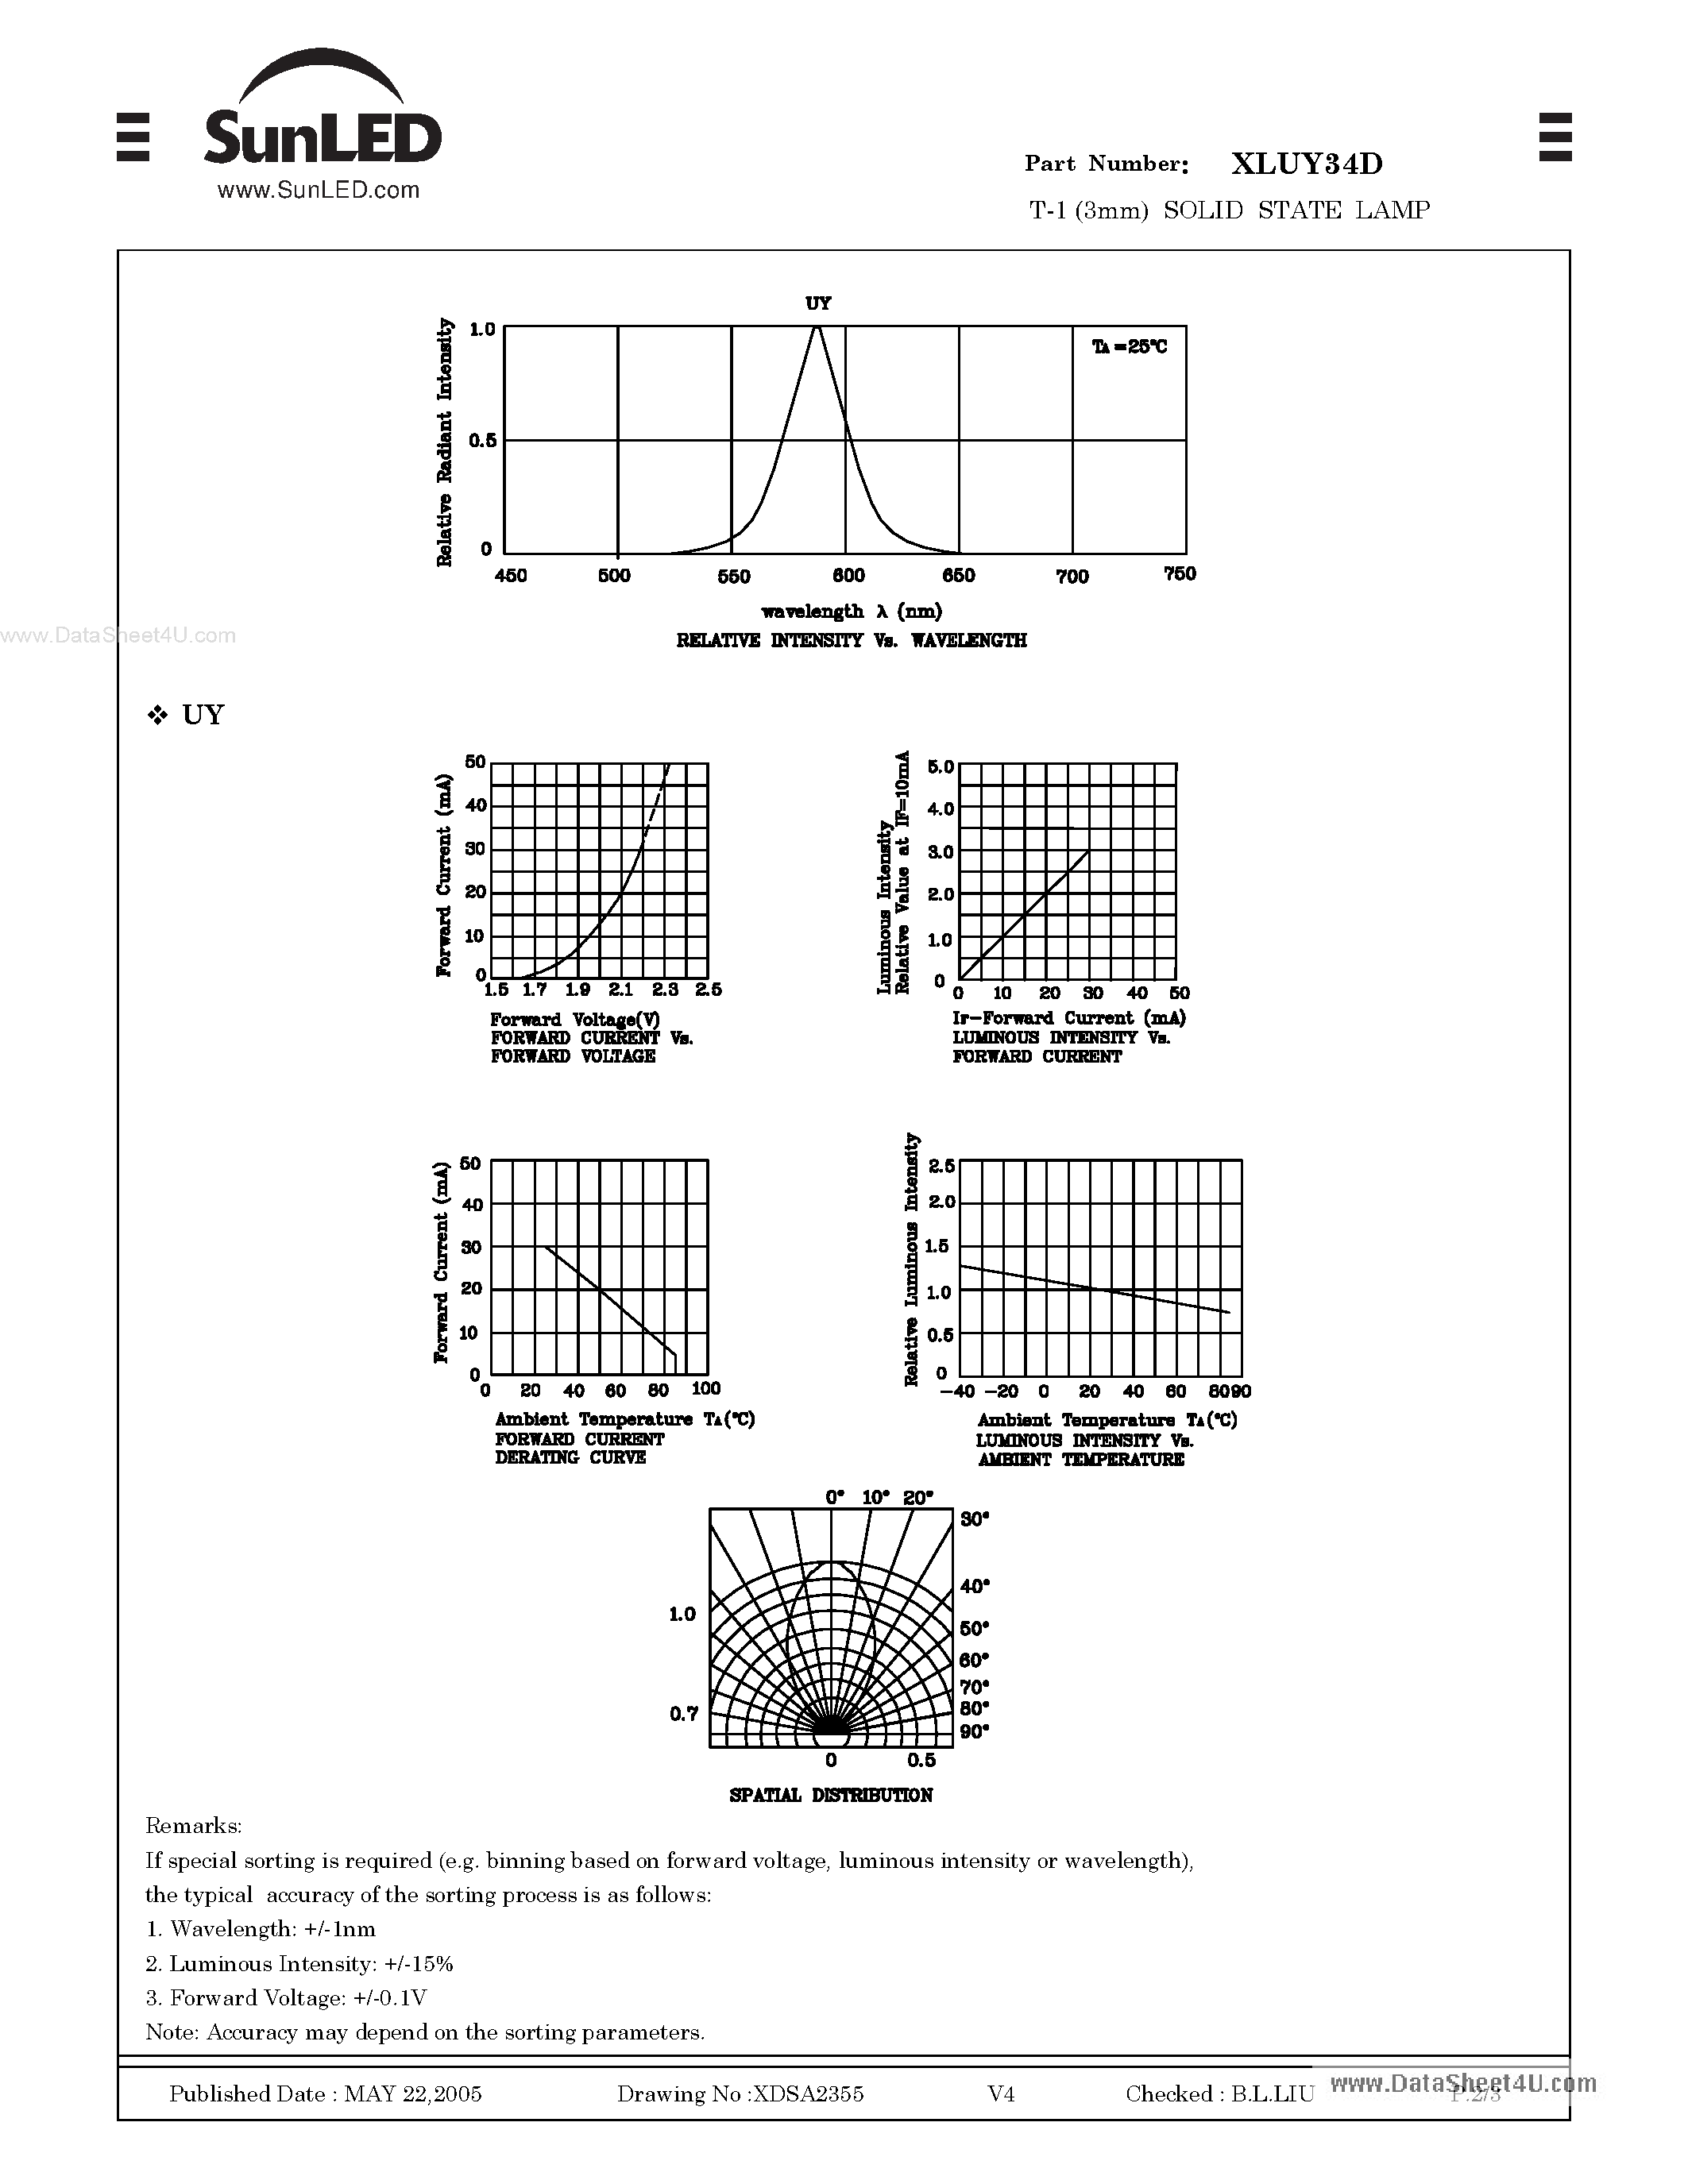 Datasheet XLUY34D - T-1 (3mm) SOLID STATE LAMP page 2